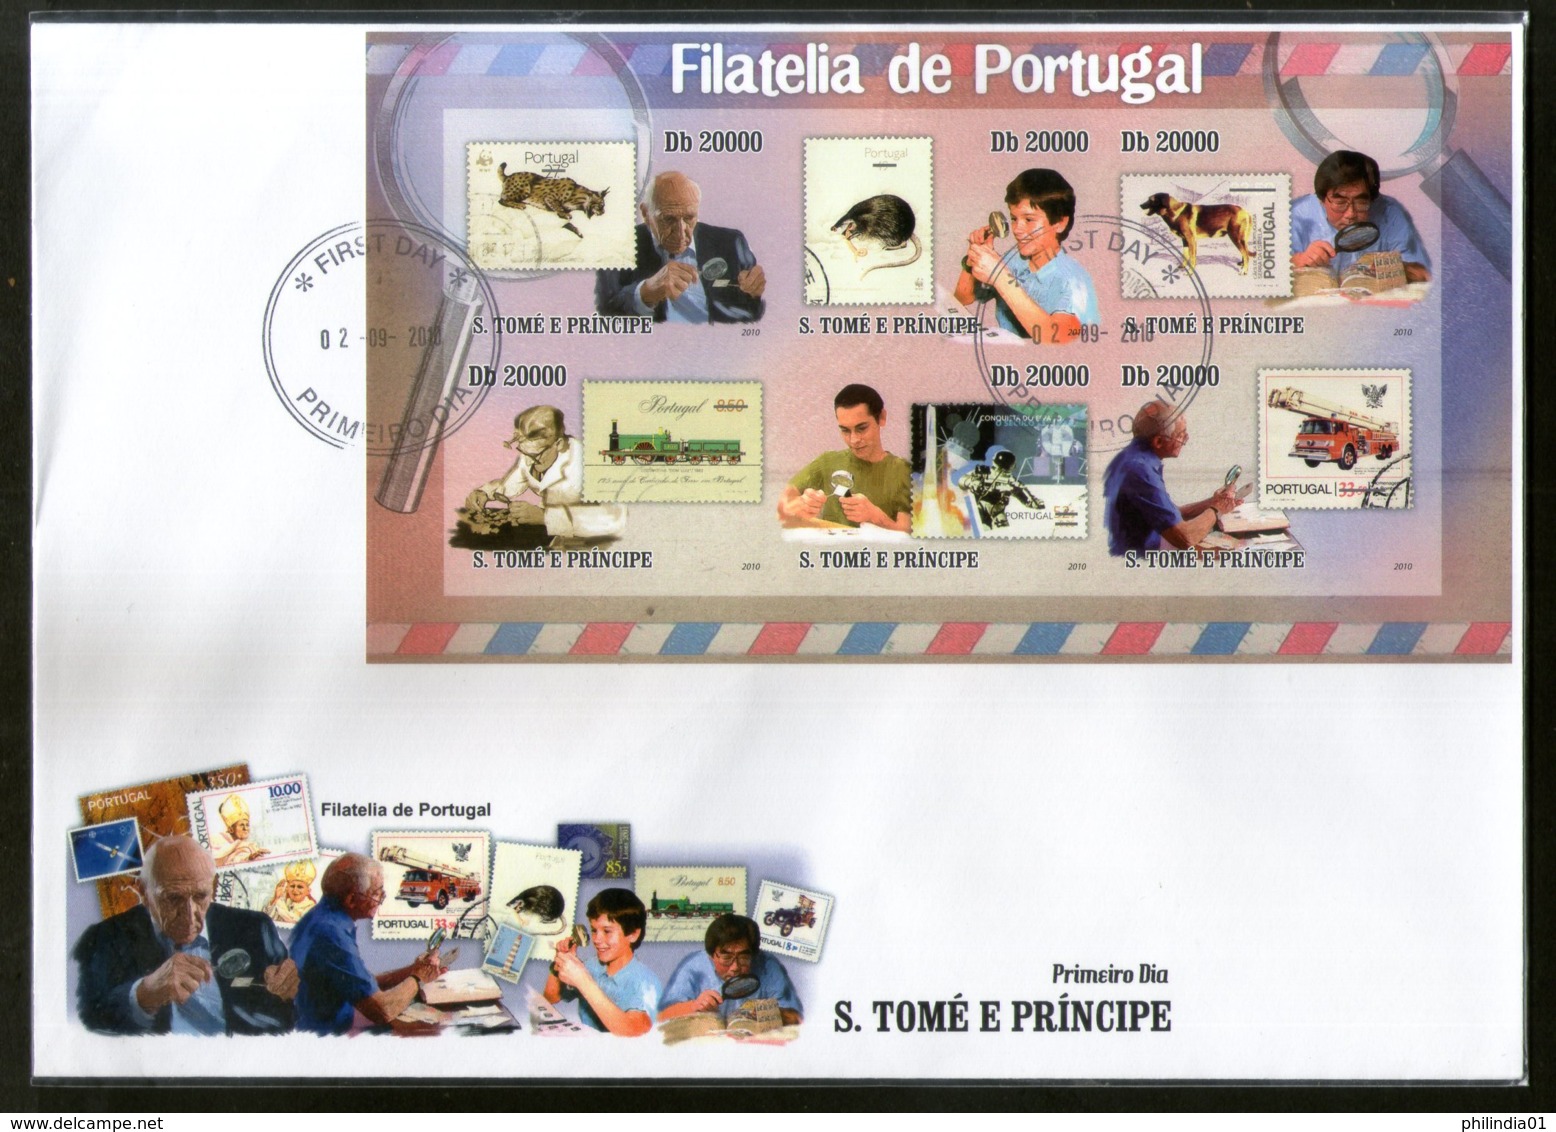 St. Thomas & Prince Islands 2010 Stamp & Collectors Of Portugal Sc 2333 Imperf M/s FDC # 19140 - Stamps On Stamps